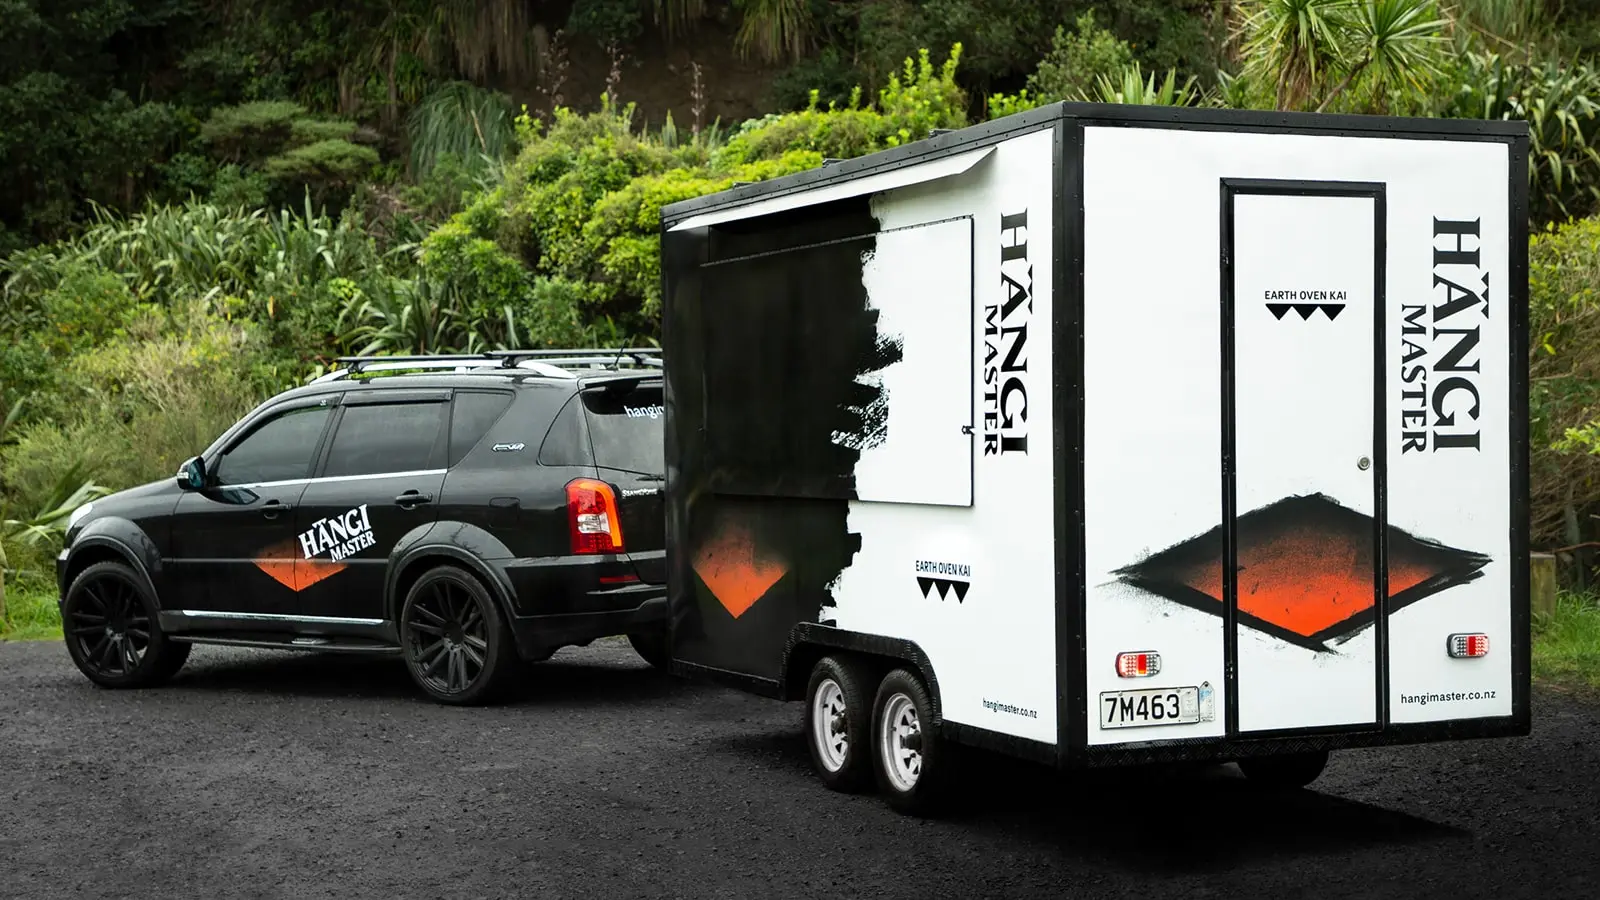 The Hangi Master foodtruck and branded vehicle